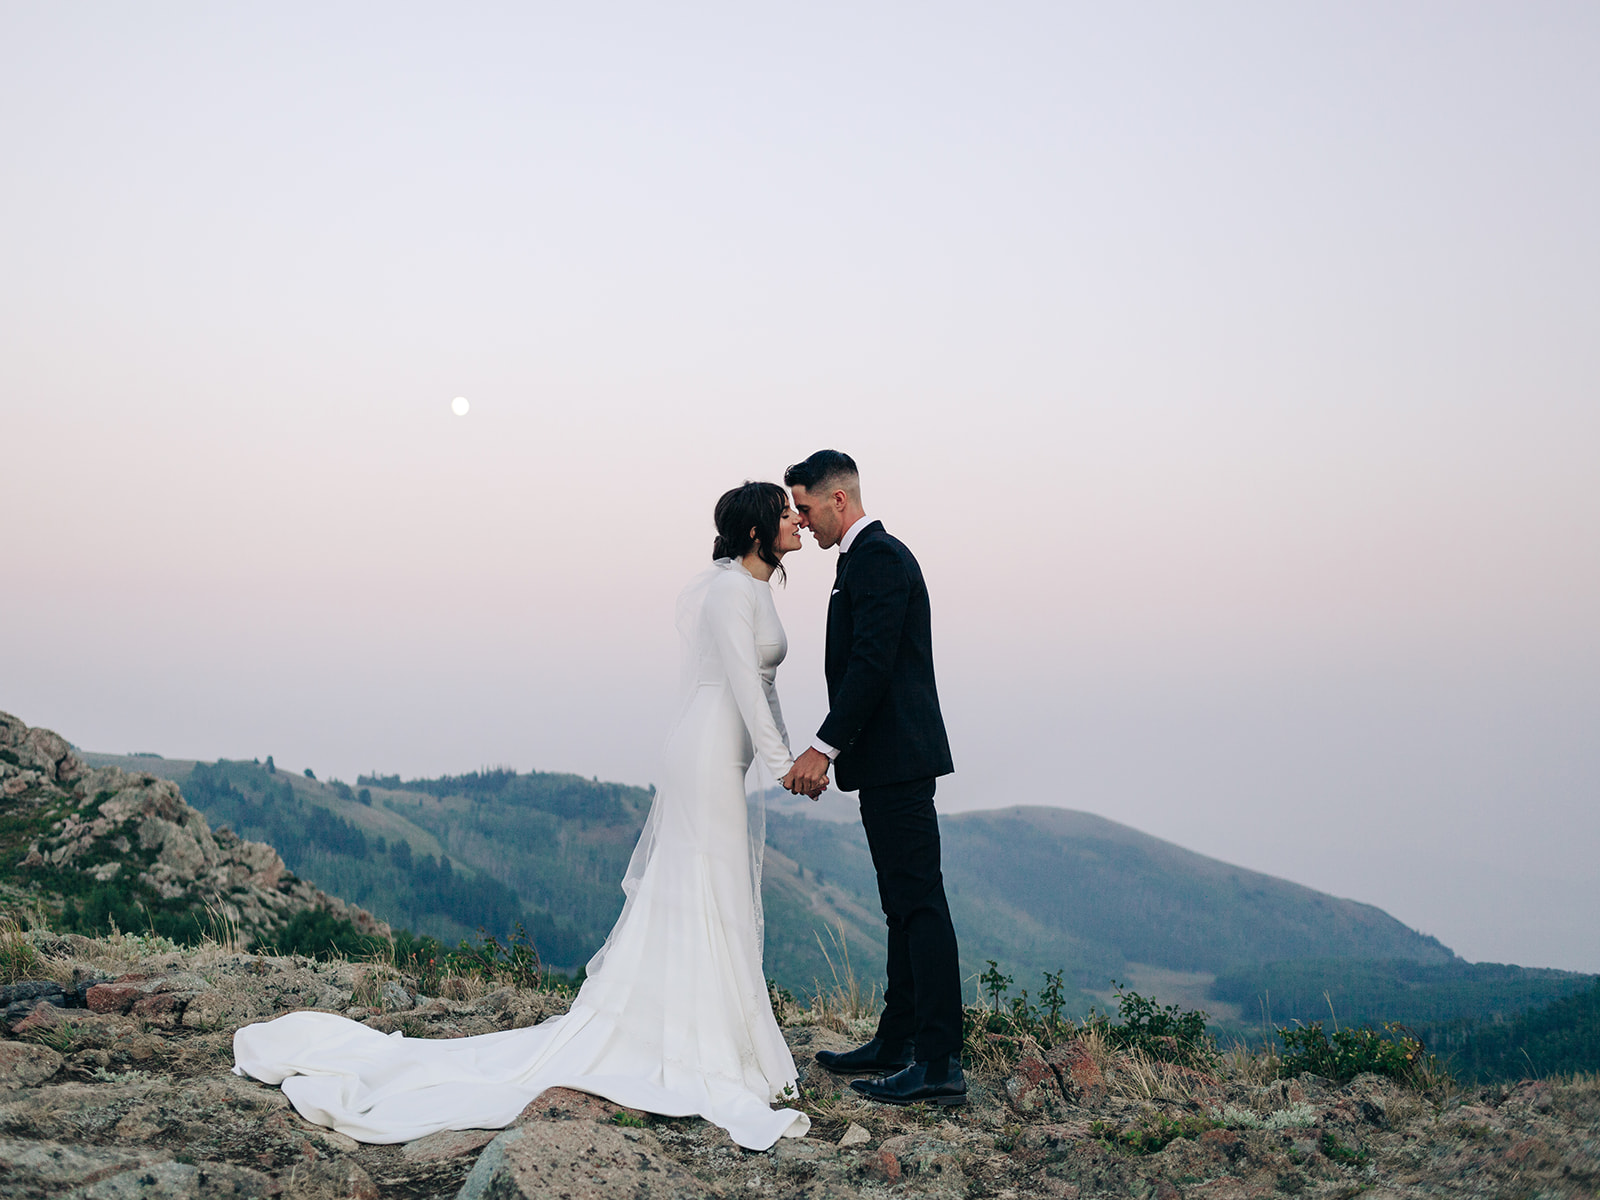 An image of couple portraits with a scenic full moon background. Taken around sunset. The bride wears a white long sleeve fitted wedding gown. Where the groom wears a black suite.